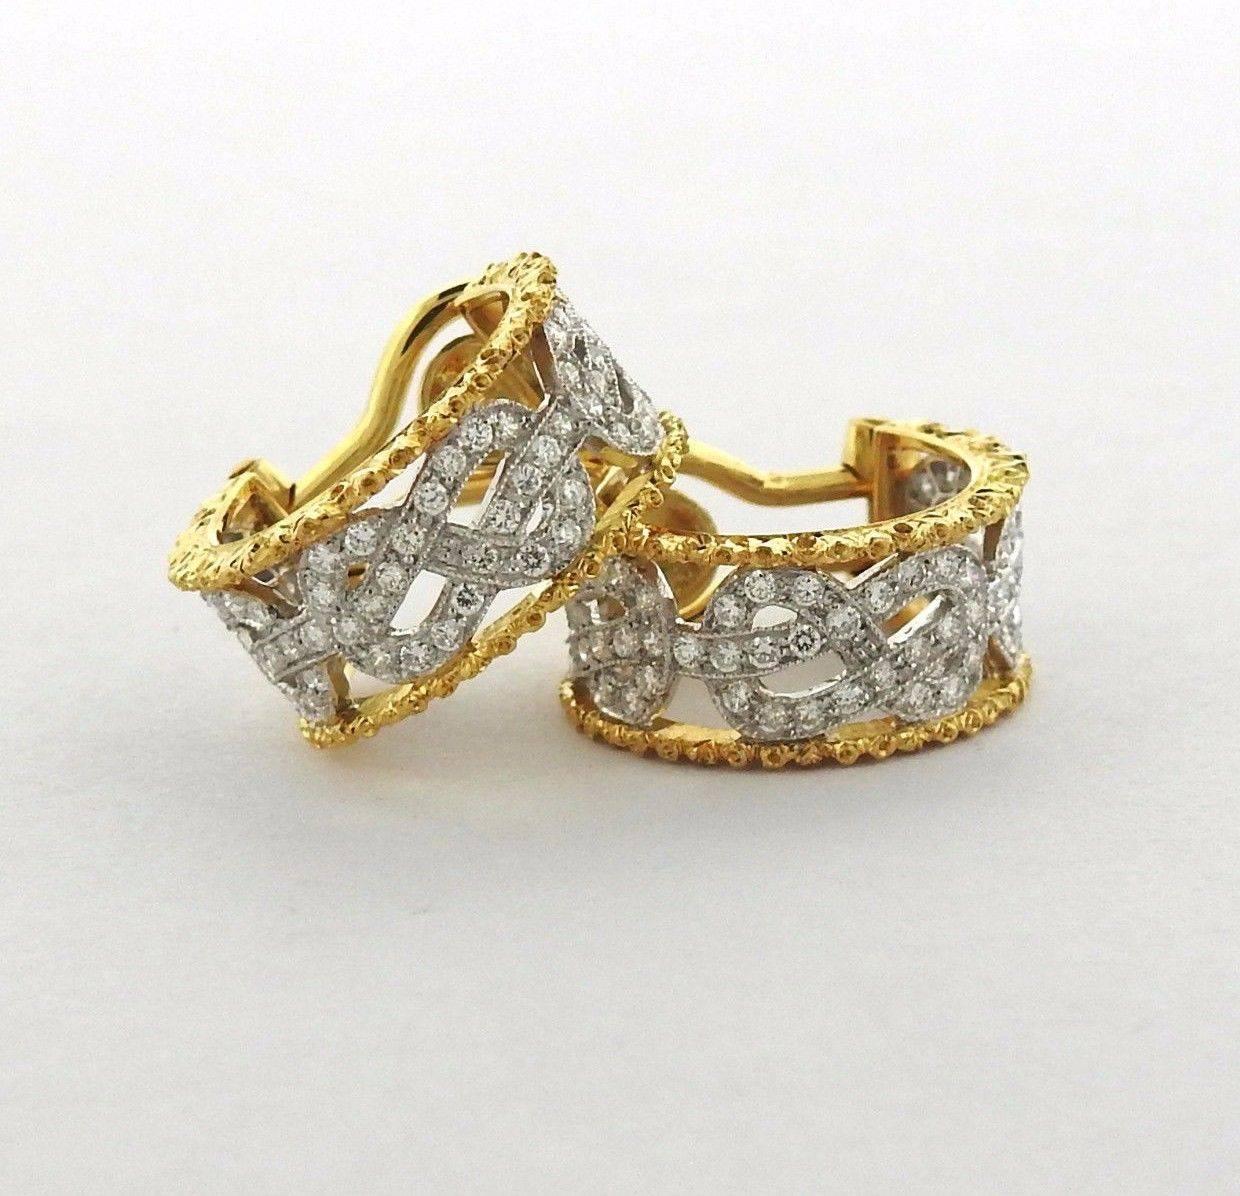 A pair of 18k yellow and white gold hoop earrings set with approximately 0.89ctw of GH/VS diamonds.  The earrings measure 18mm in diameter x 8mm wide and weigh 7.9 grams. Marked: Buccellati, Italy, 18k. Comes with Buccellati paperwork. Retail $21030.